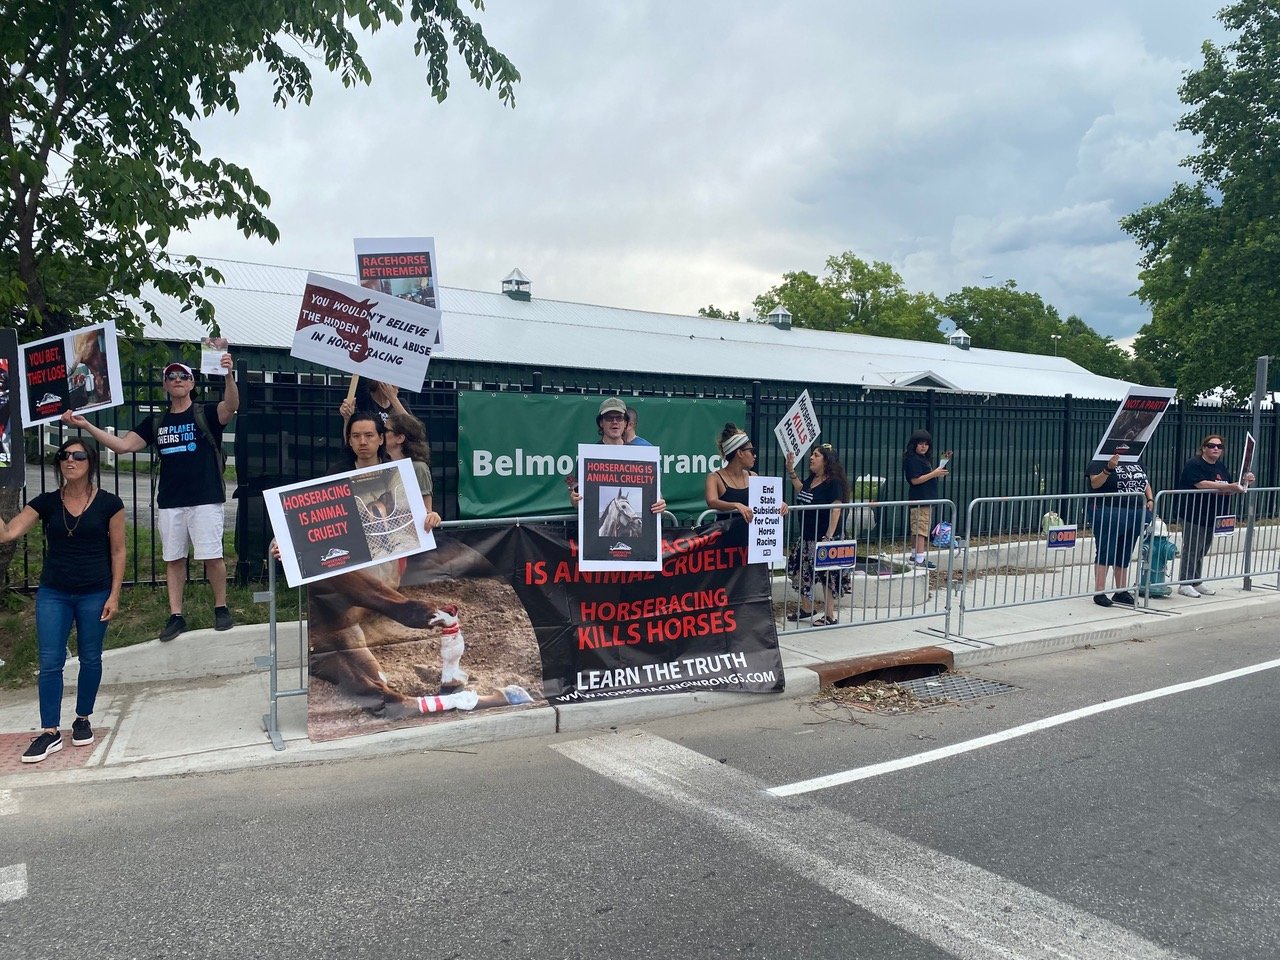 Over 100 animal rights activists chanted and held signs outside Belmont Park for three hours prior to the Belmont Stakes.